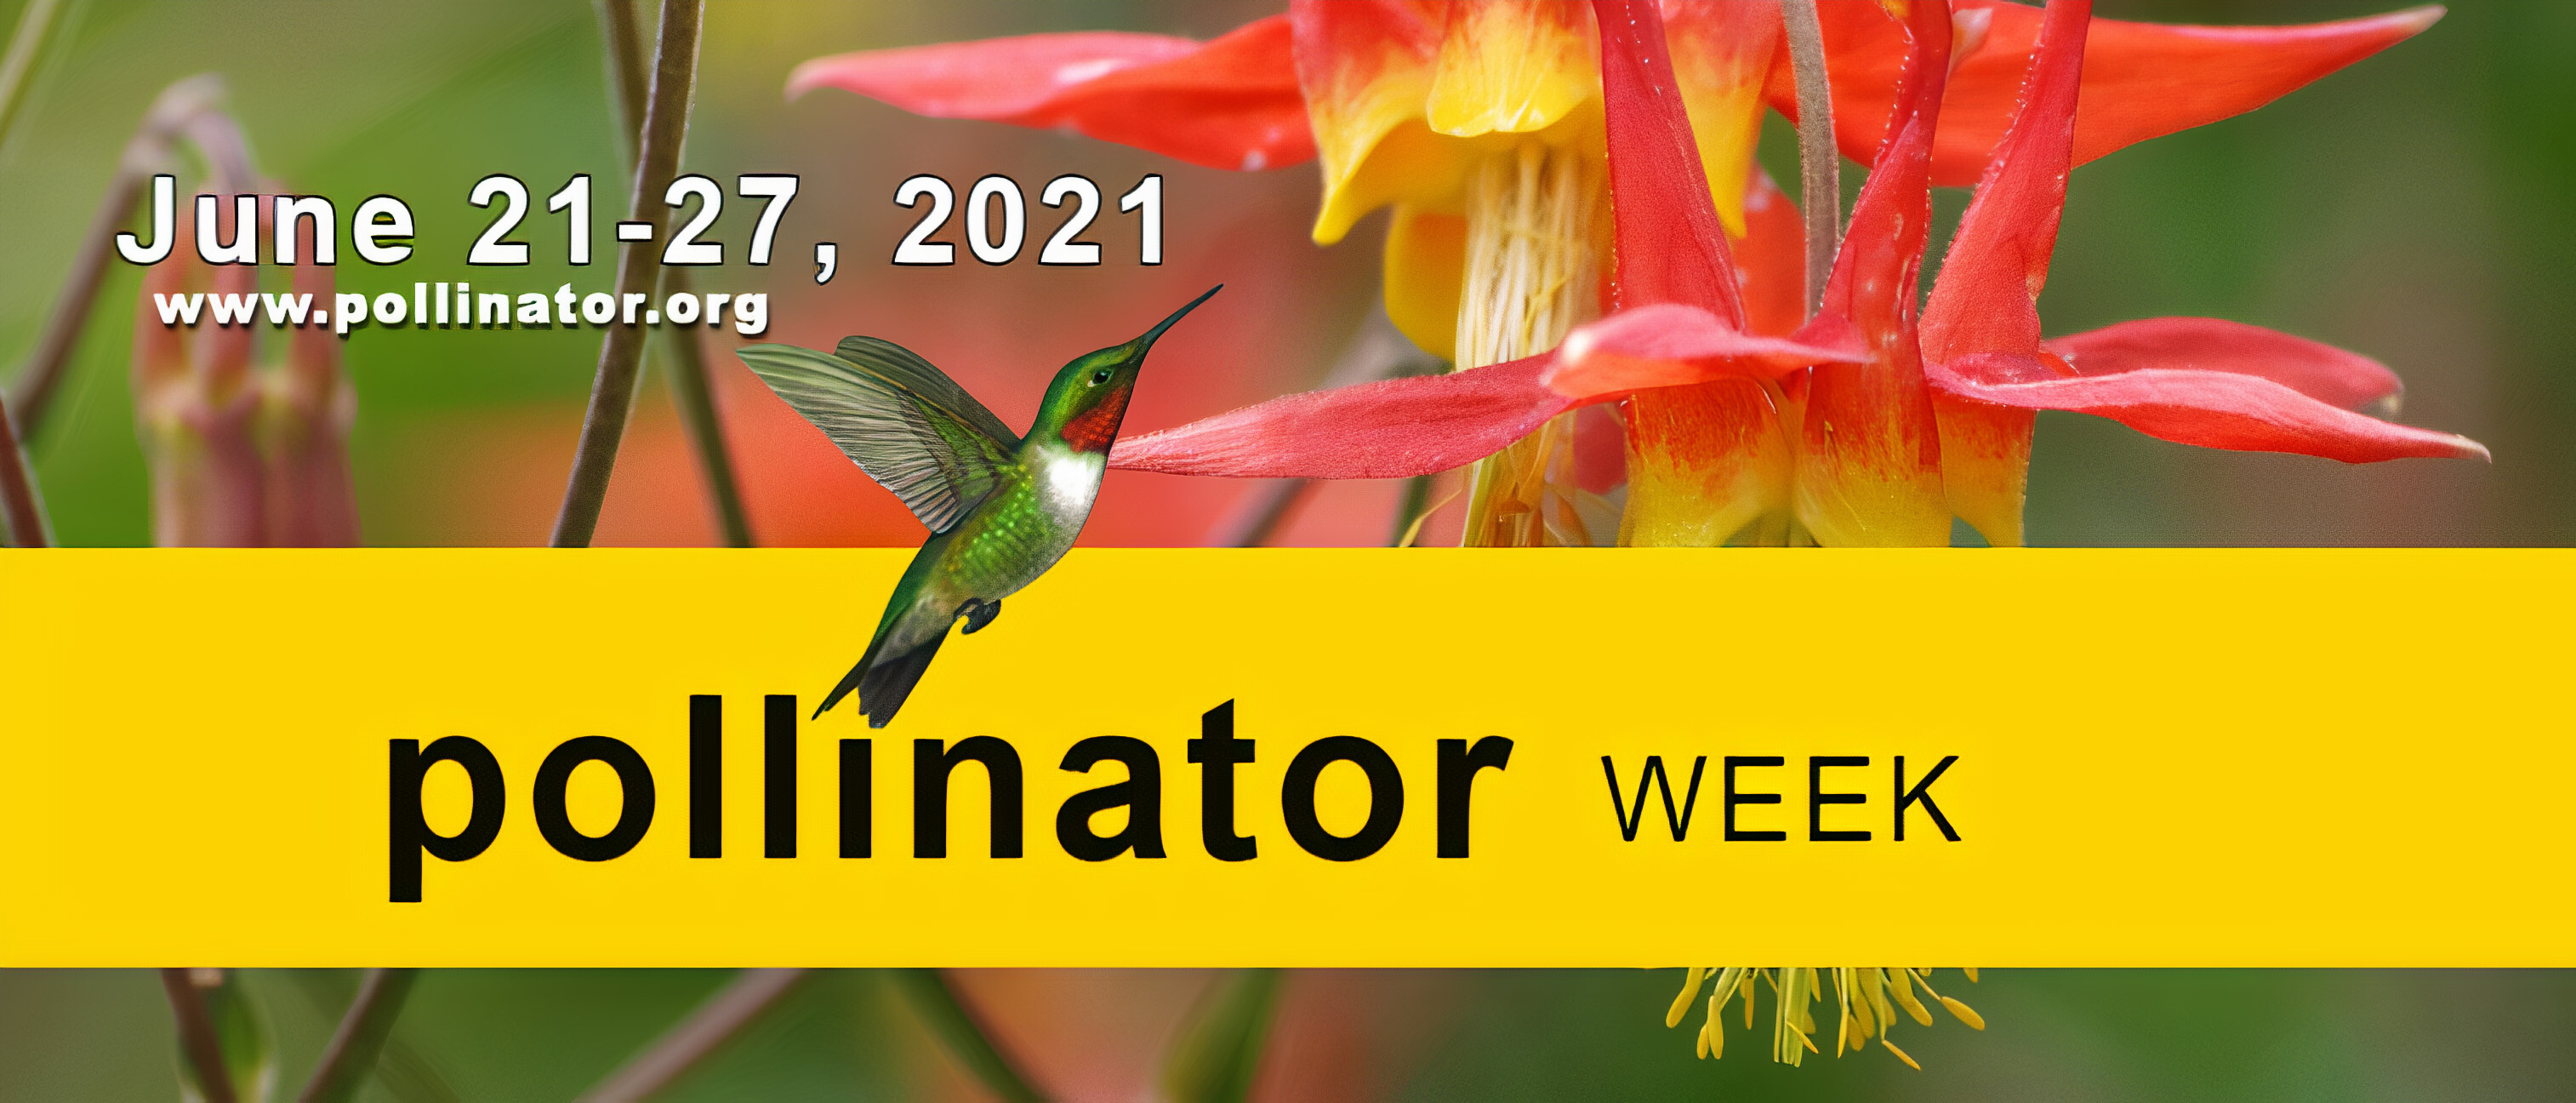 Pollinator Week Cover Photo with picture of hummingbird. June 21-27, 2021. www.pollinator.org